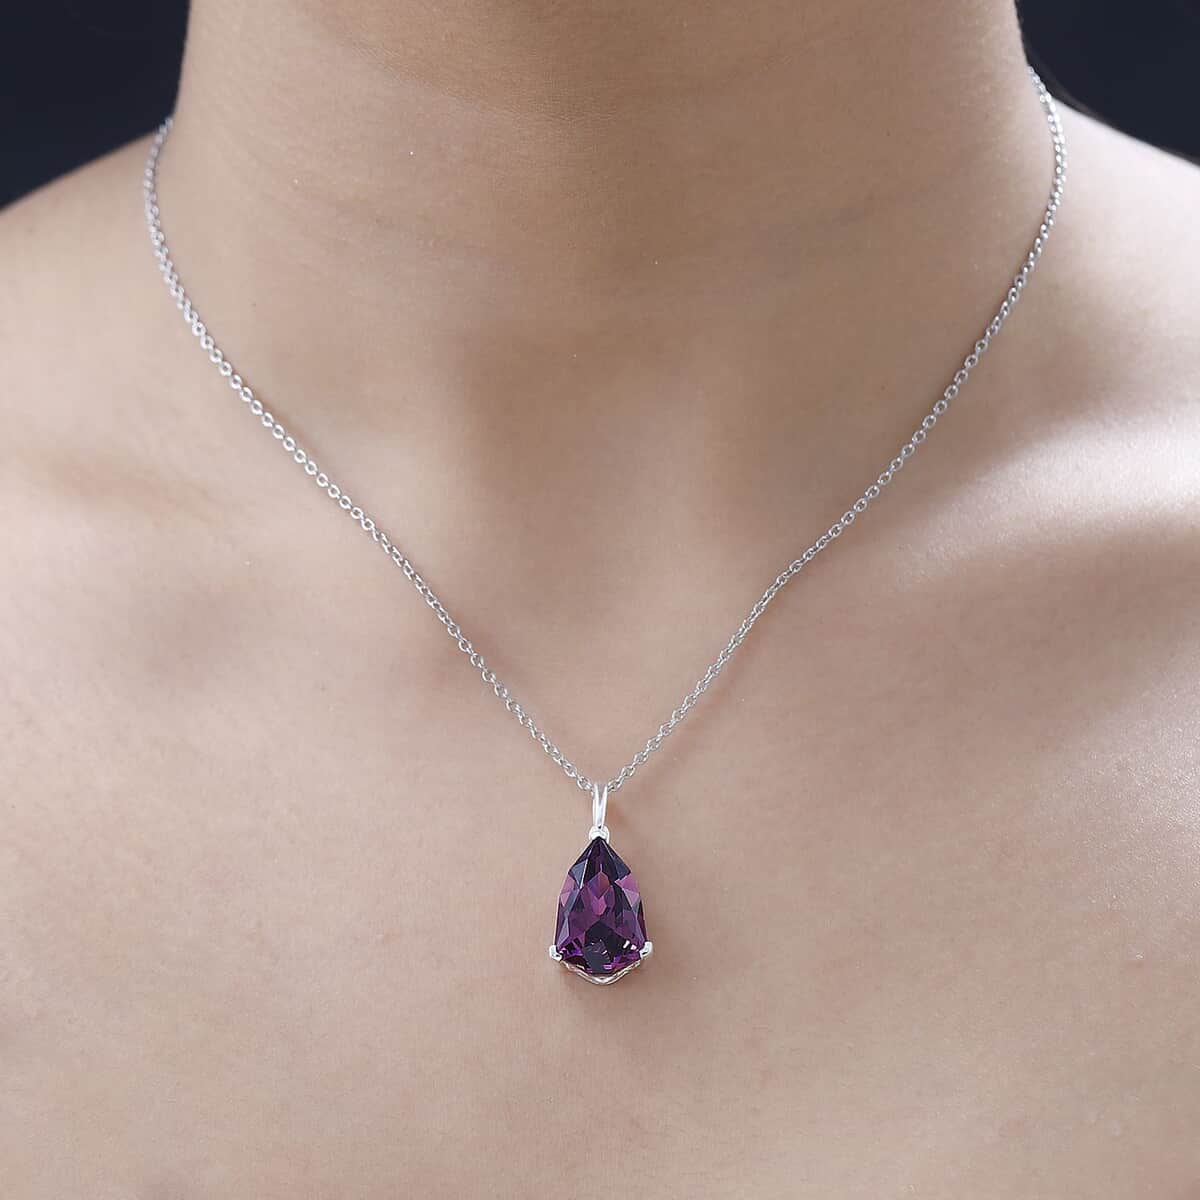 Designer Premium Foilback Amethyst Color Austrian Crystal Pendant in Sterling Silver with Stainless Steel Necklace 20 Inches image number 2